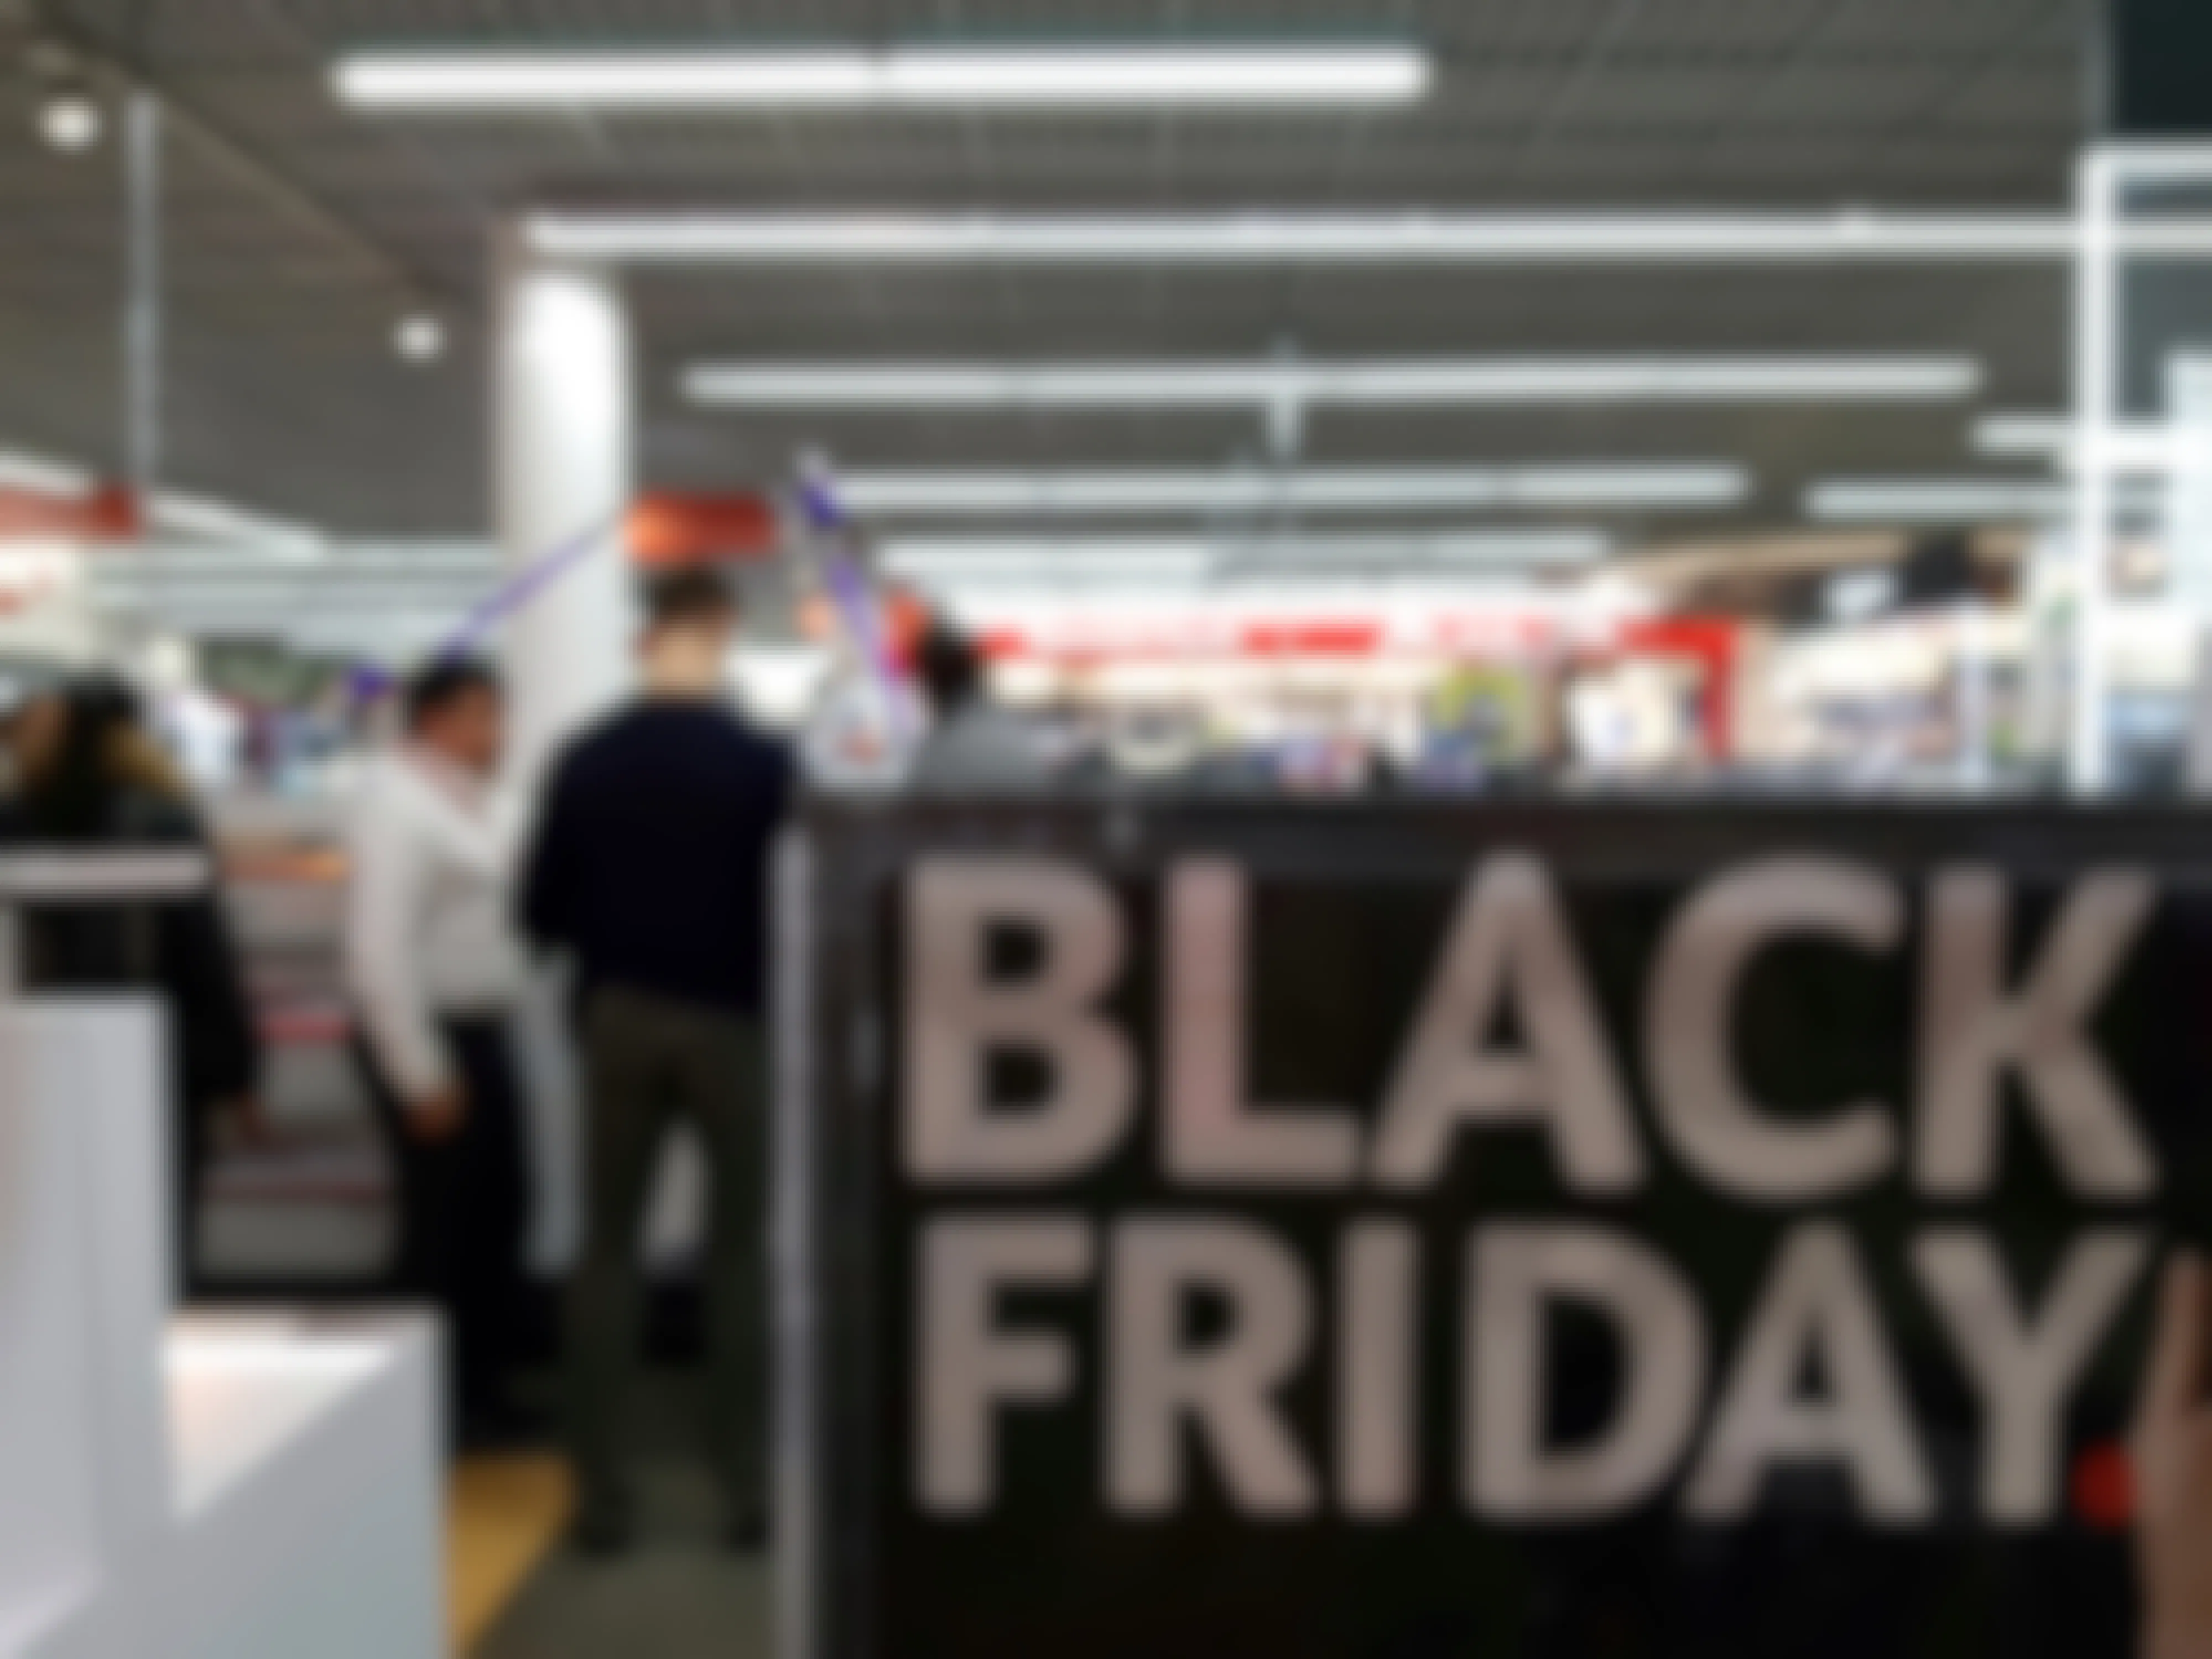 Black friday sign inside a electronics store